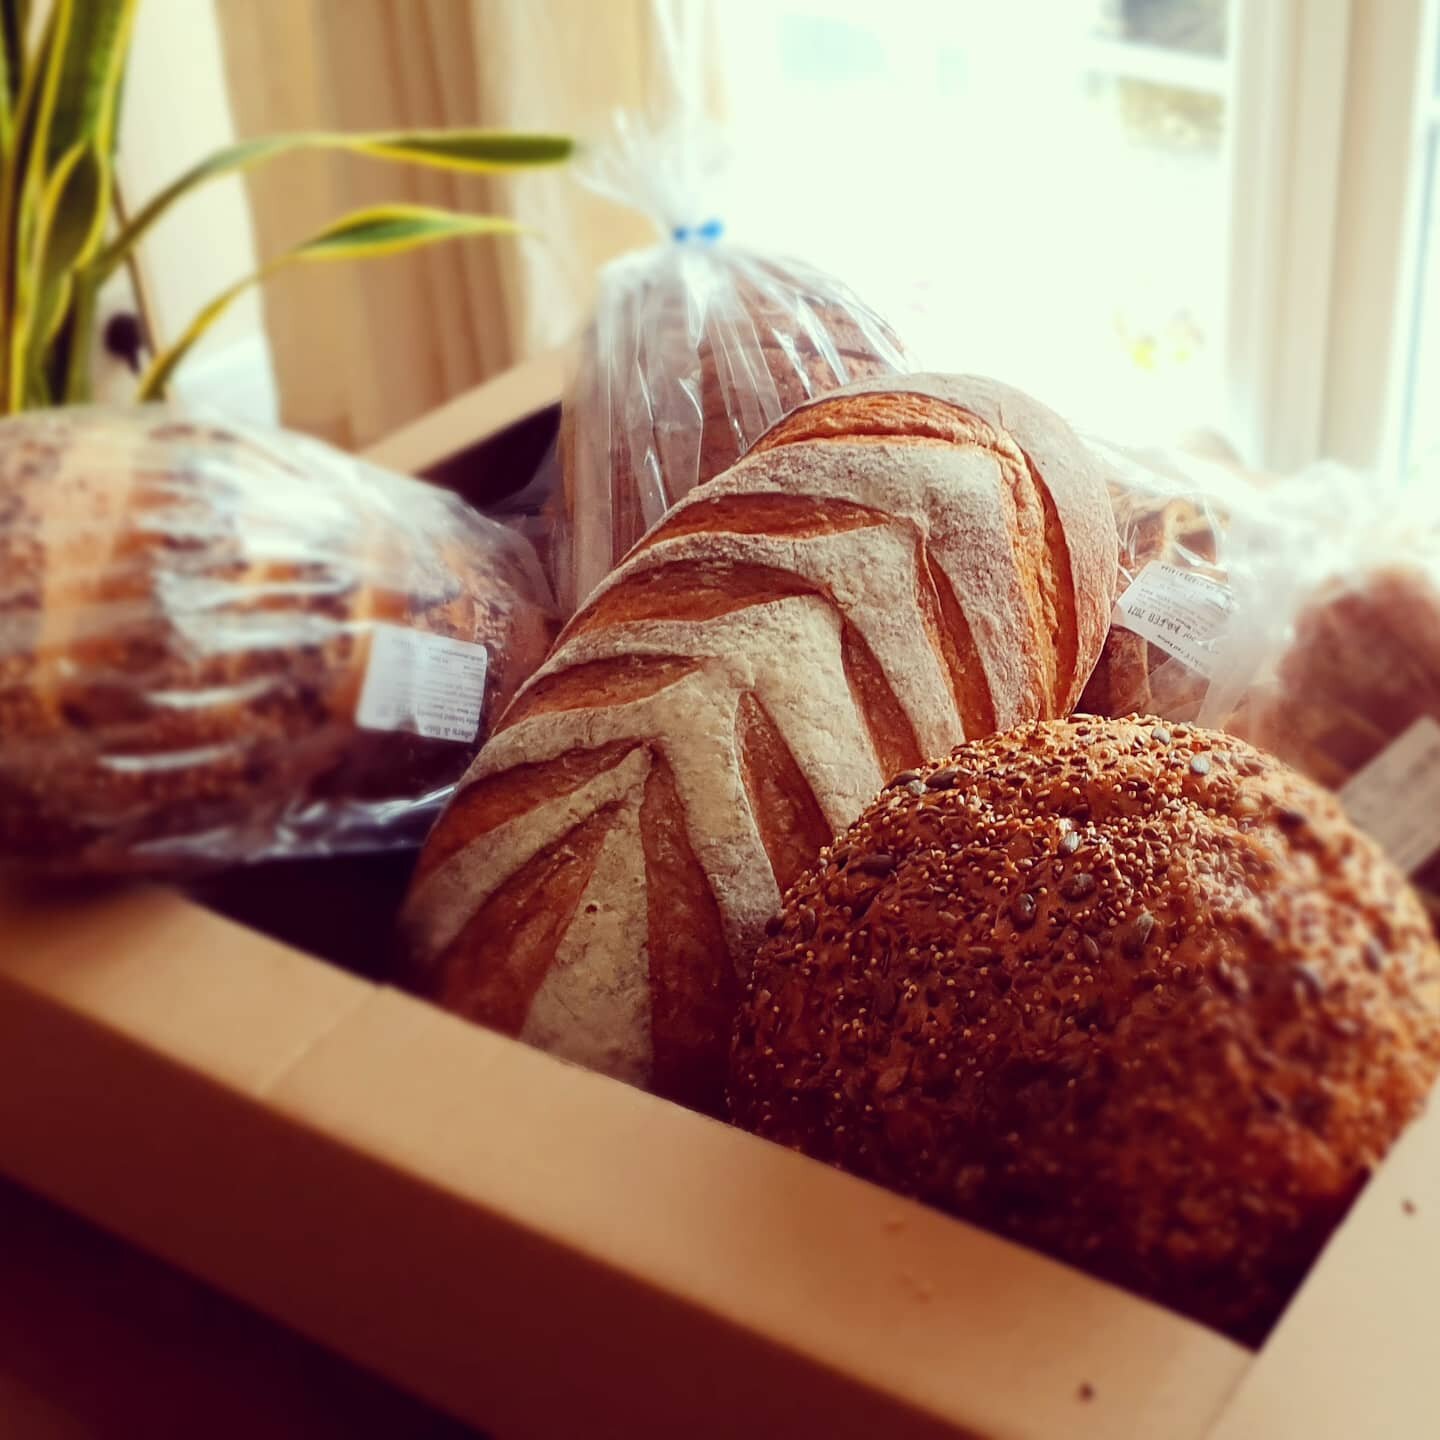 It's a tough job...that's our weekend sorted, trying these beauties from Coburn &amp; Baker to get the best bread for your sarnies &amp; breakfasts

#coburnandbaker 
#worthingindependent 
#worthingfoodanddrink